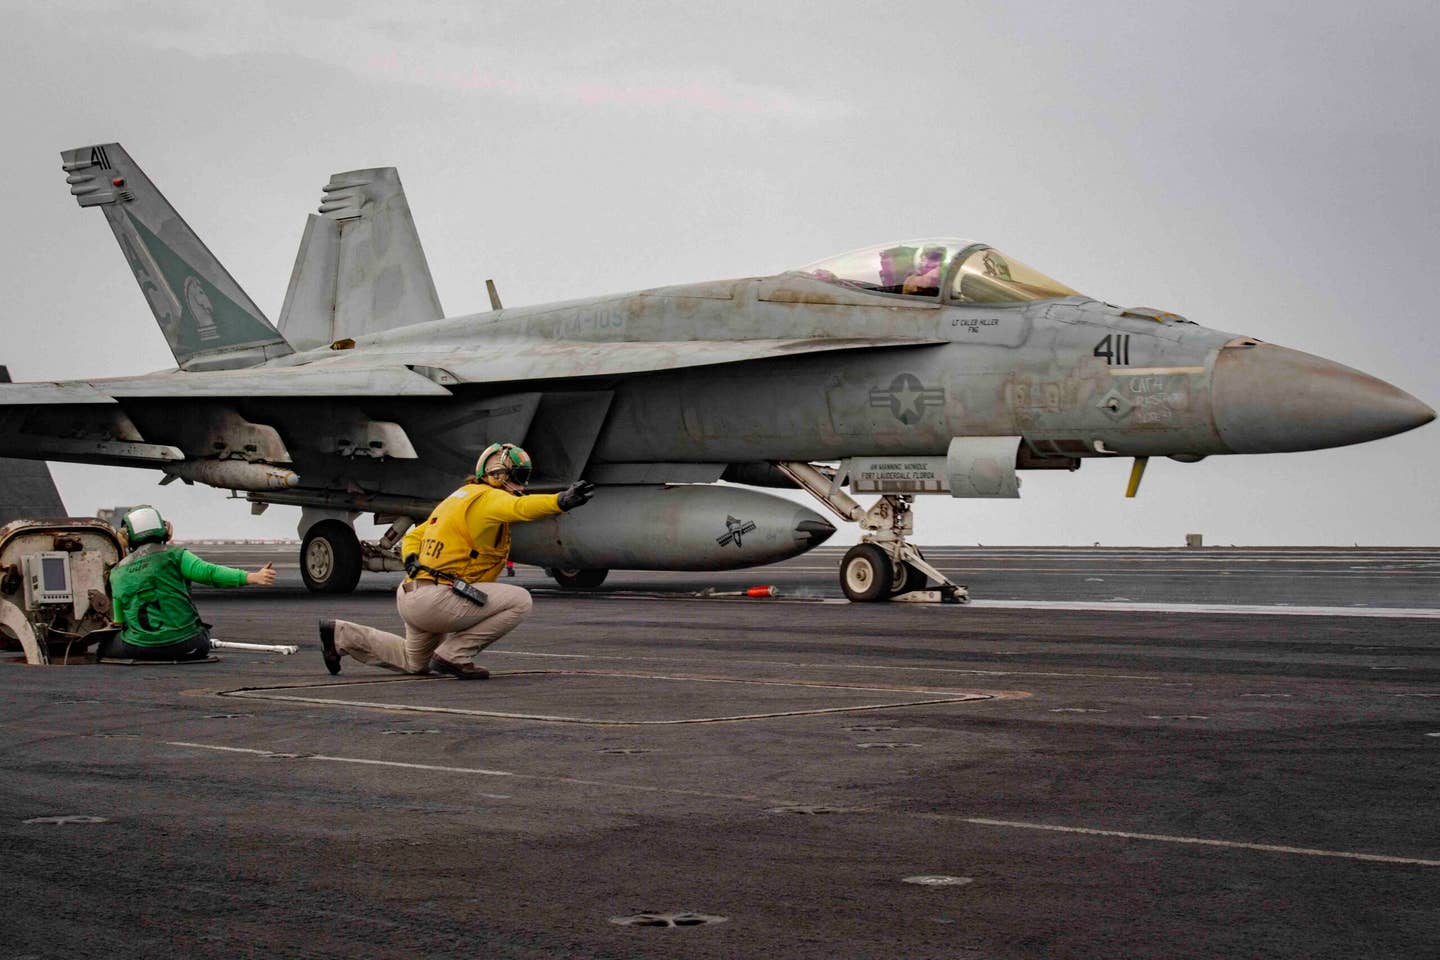 Sailors signal the launch of an F/A-18E Super Hornet, attached to the "Gunslingers" of Strike Fighter Squadron (VFA) 105, during flight operations aboard the Nimitz-class aircraft carrier USS Dwight D. Eisenhower (CVN 69) in the Red Sea, March 5. The Dwight D. Eisenhower Carrier Strike Group is deployed to the U.S. 5th Fleet area of operations to support maritime security and stability in the Middle East region. (Official U.S. Navy photo)